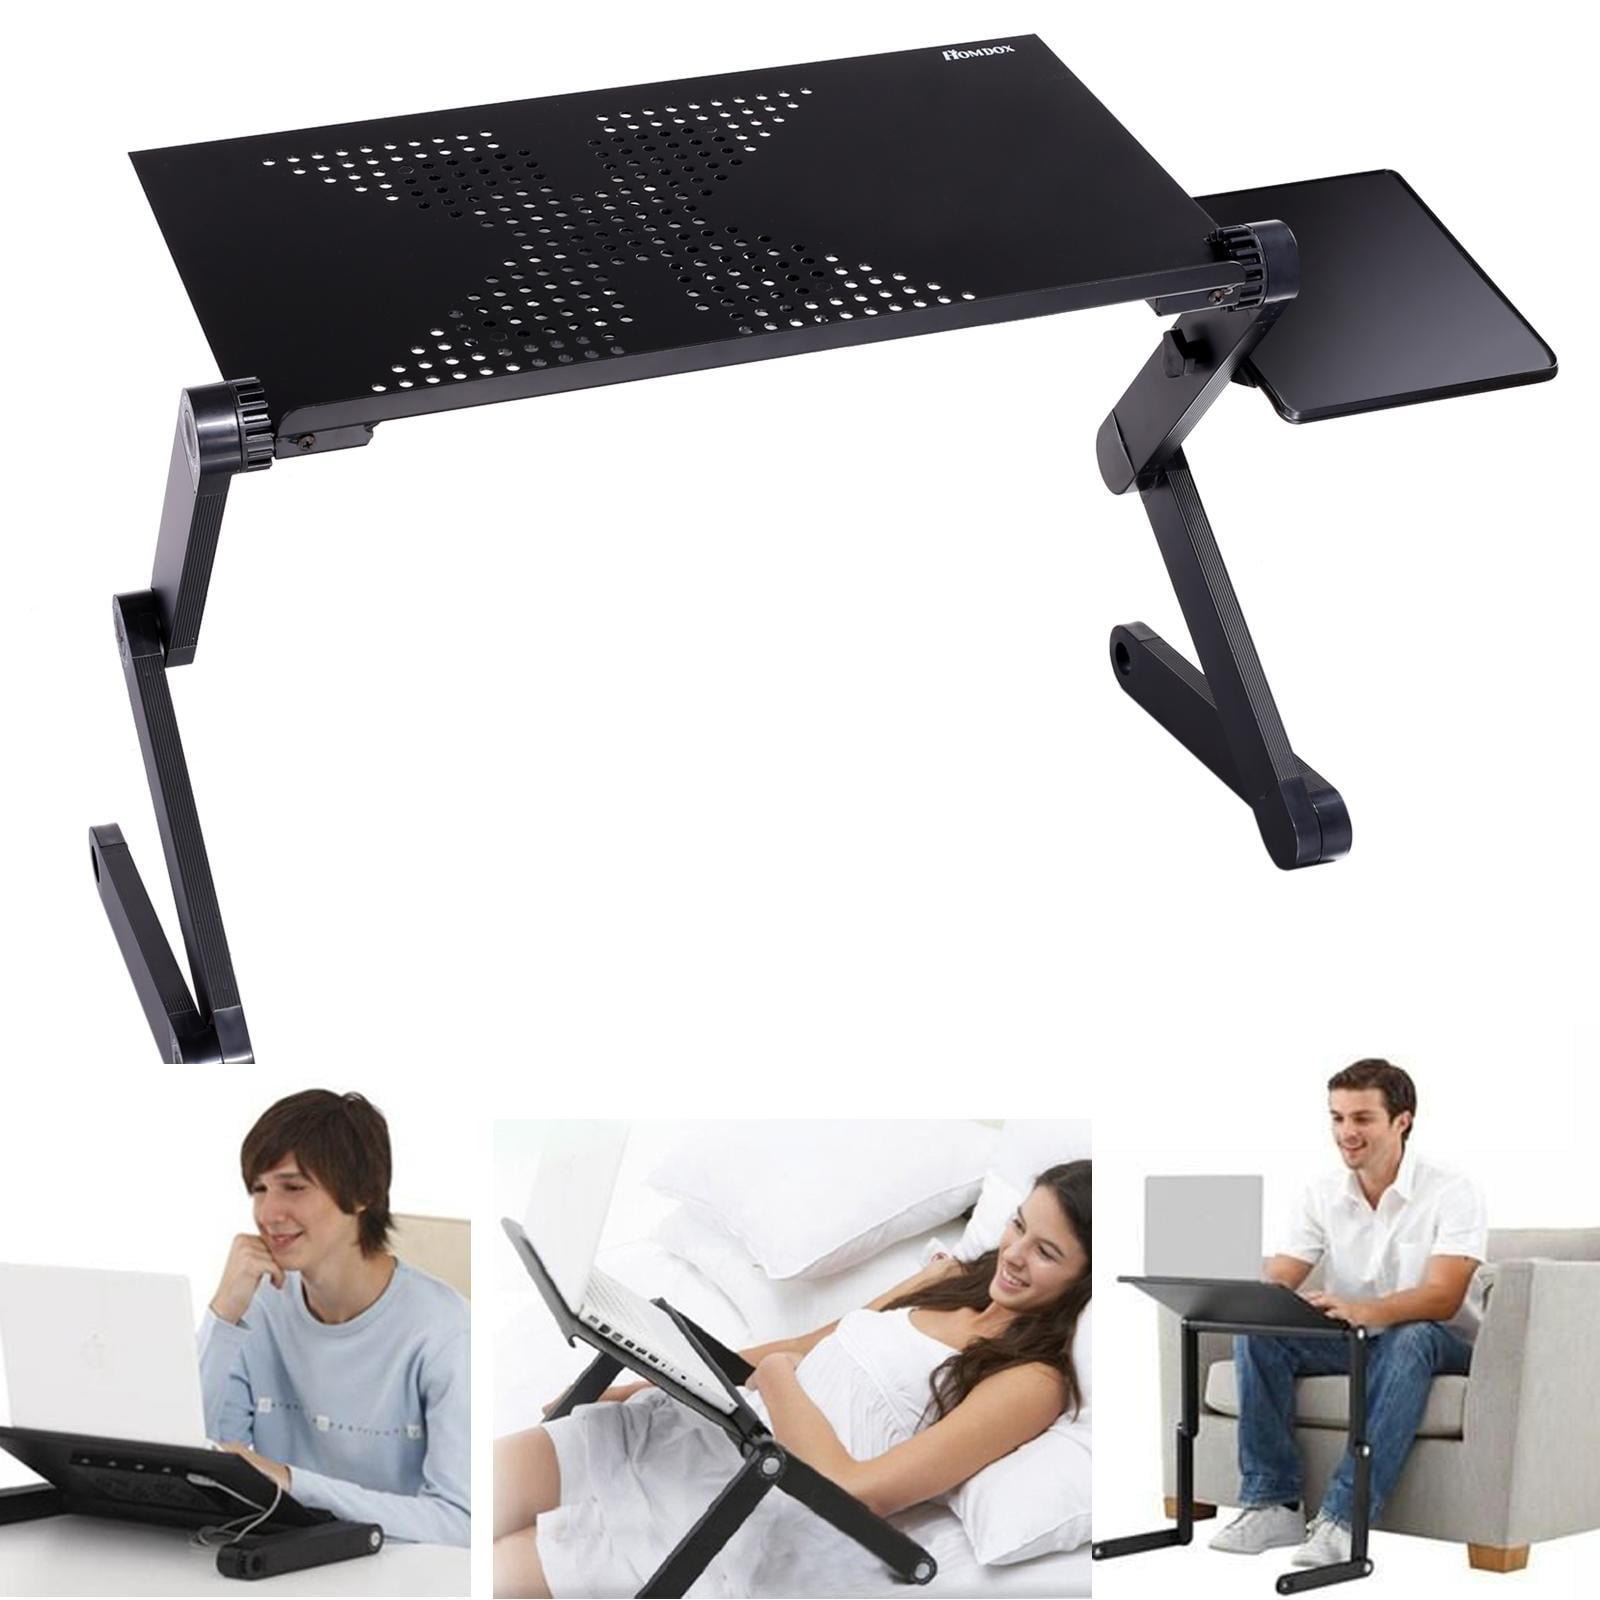 Foldable Notebook Stand Holder for Sofa Couch Bamboo Grain Kavalan Standerd Size Portable Laptop Table with Handle Height & Angle Adjustable Sit and Stand Desk Bed & Breakfast Table Tray